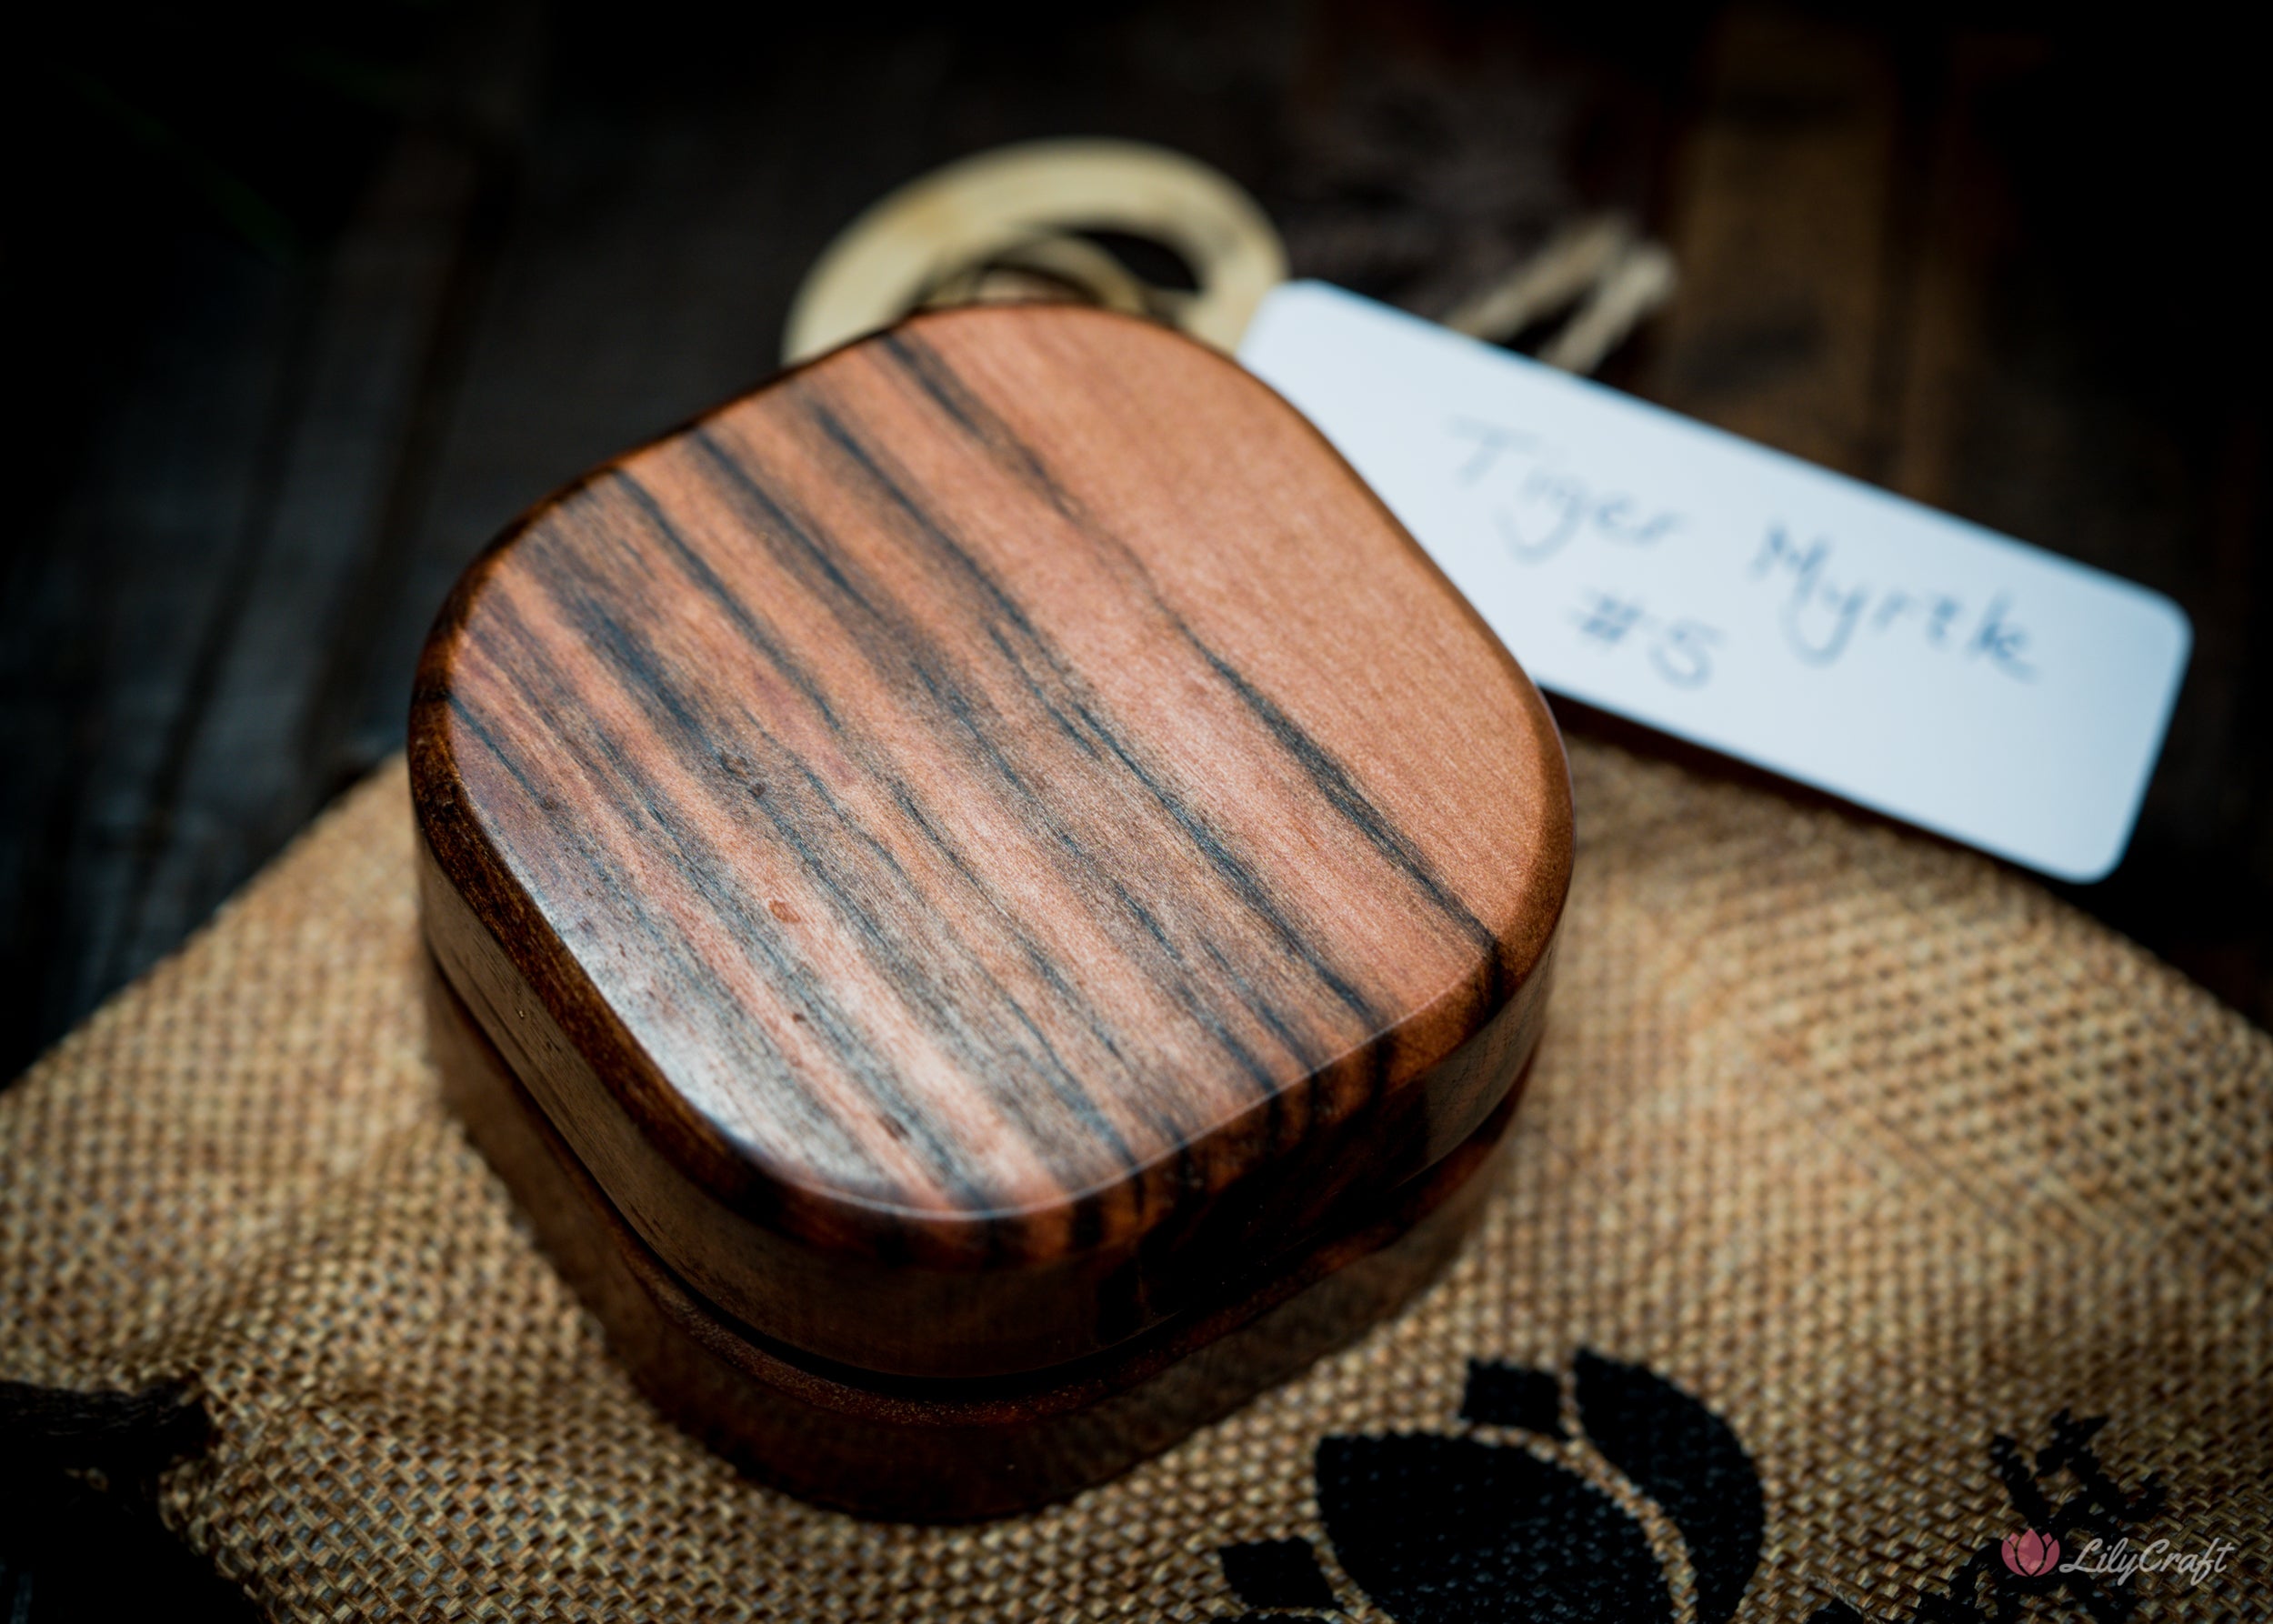 Detailed shot showcasing the craftsmanship of the wooden compass.